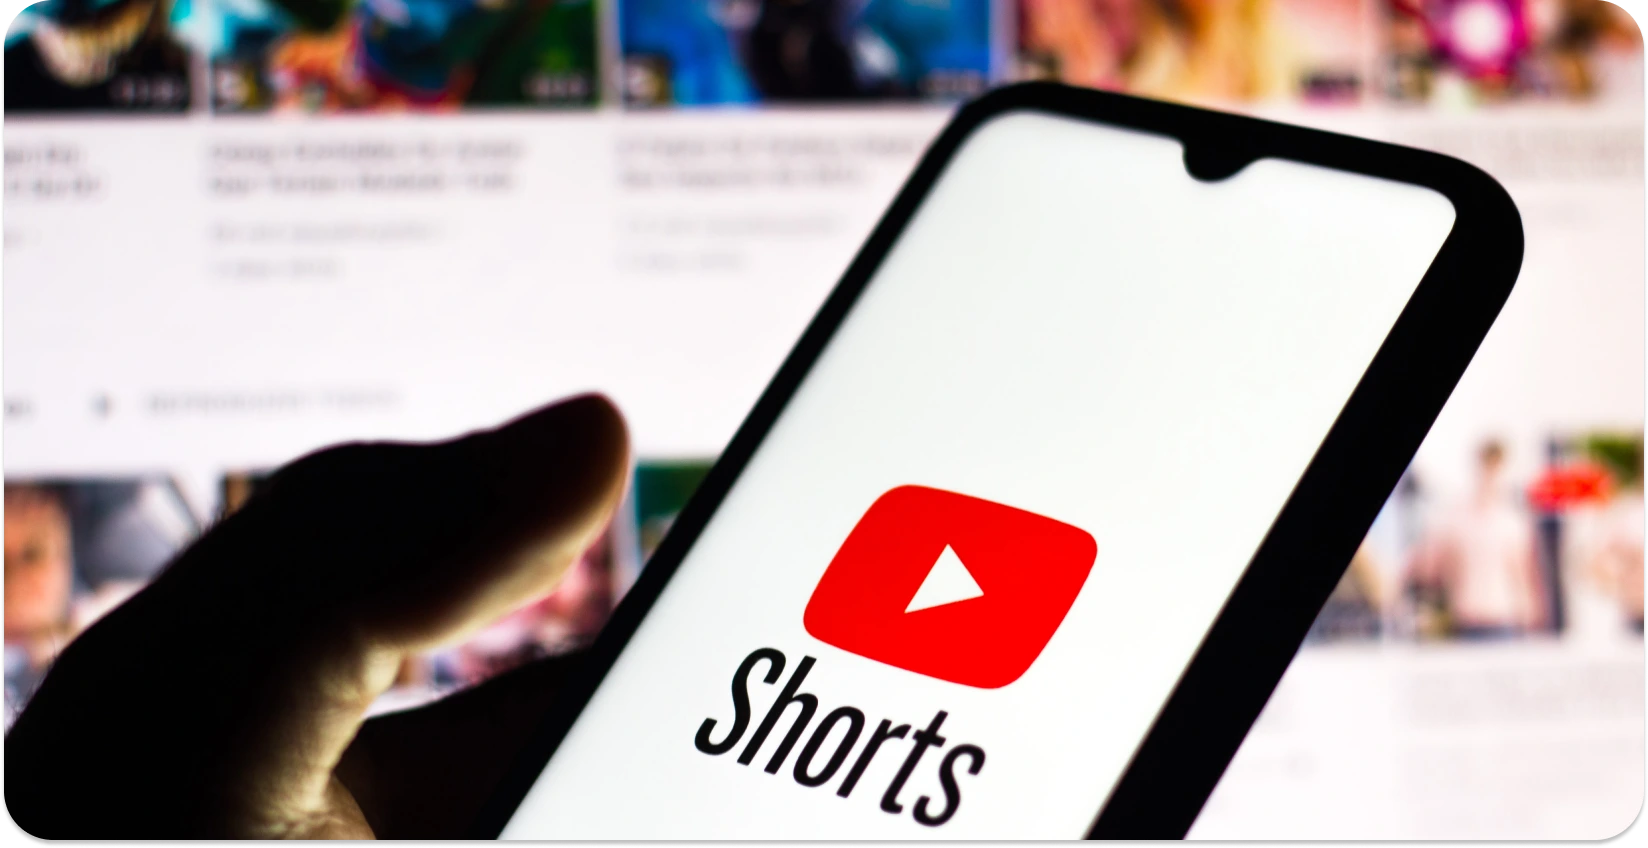 Smartphone with YouTube Shorts logo, representing the transcription of short-form videos.